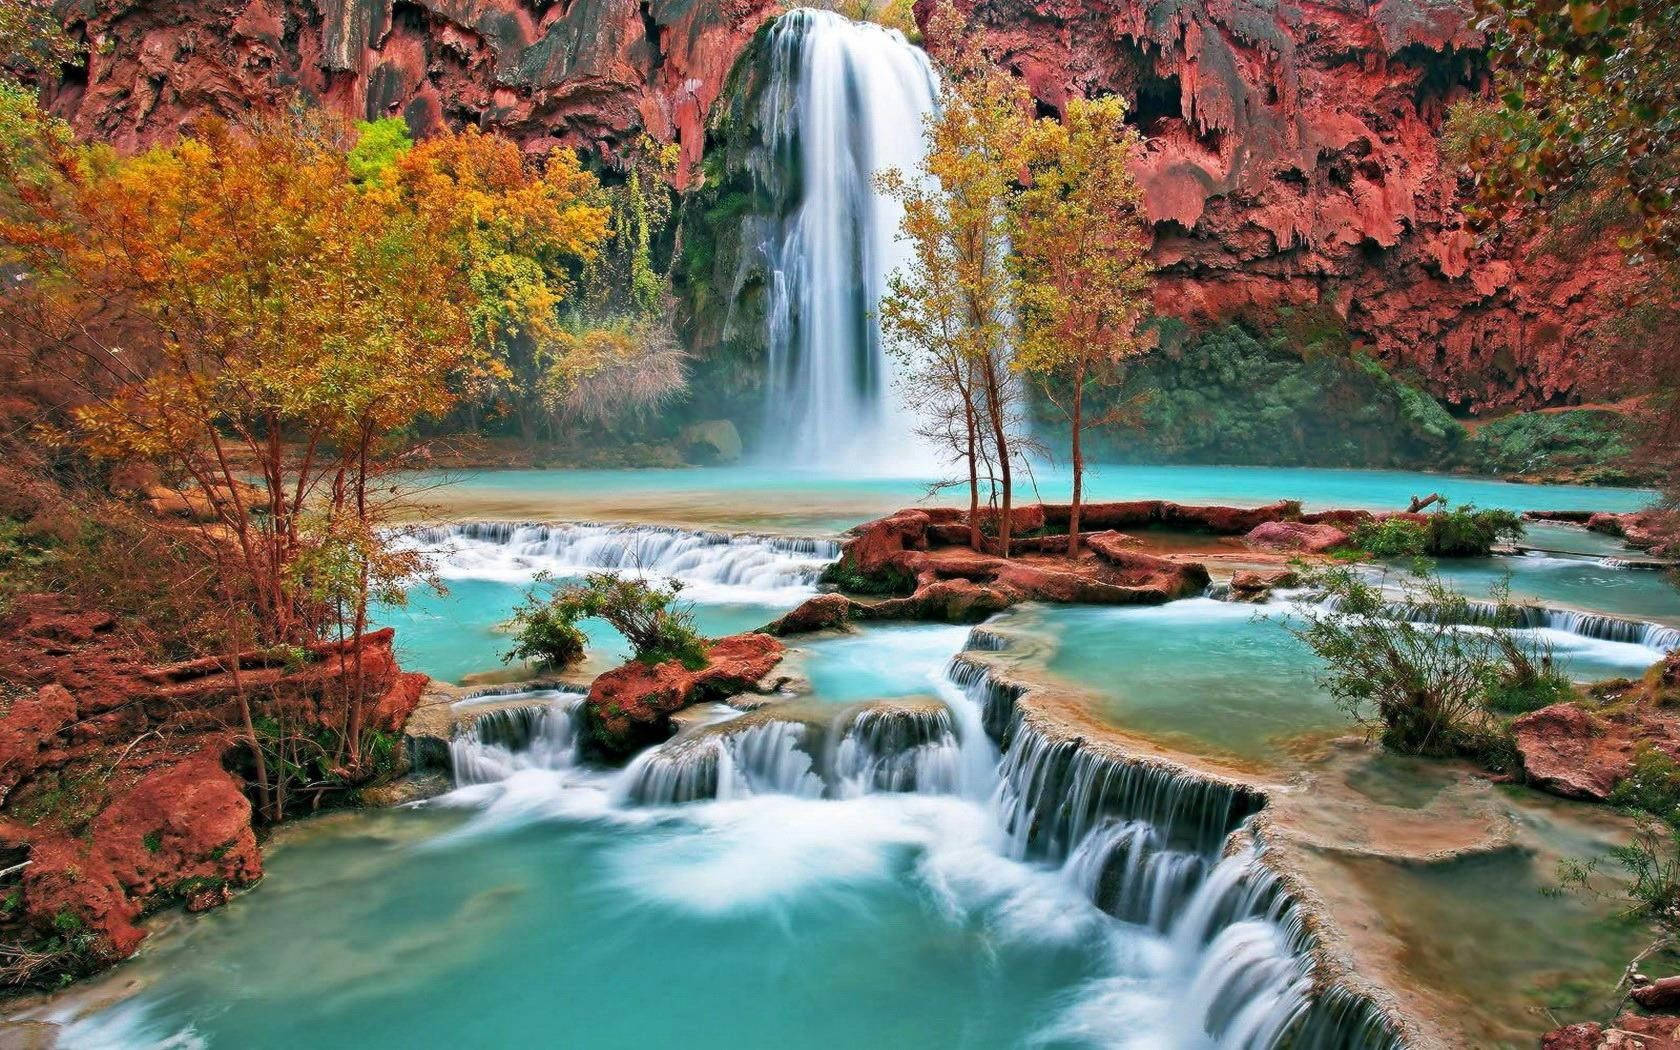 Enjoying the Sights and Sounds of a peaceful Autumn Waterfall Wallpaper